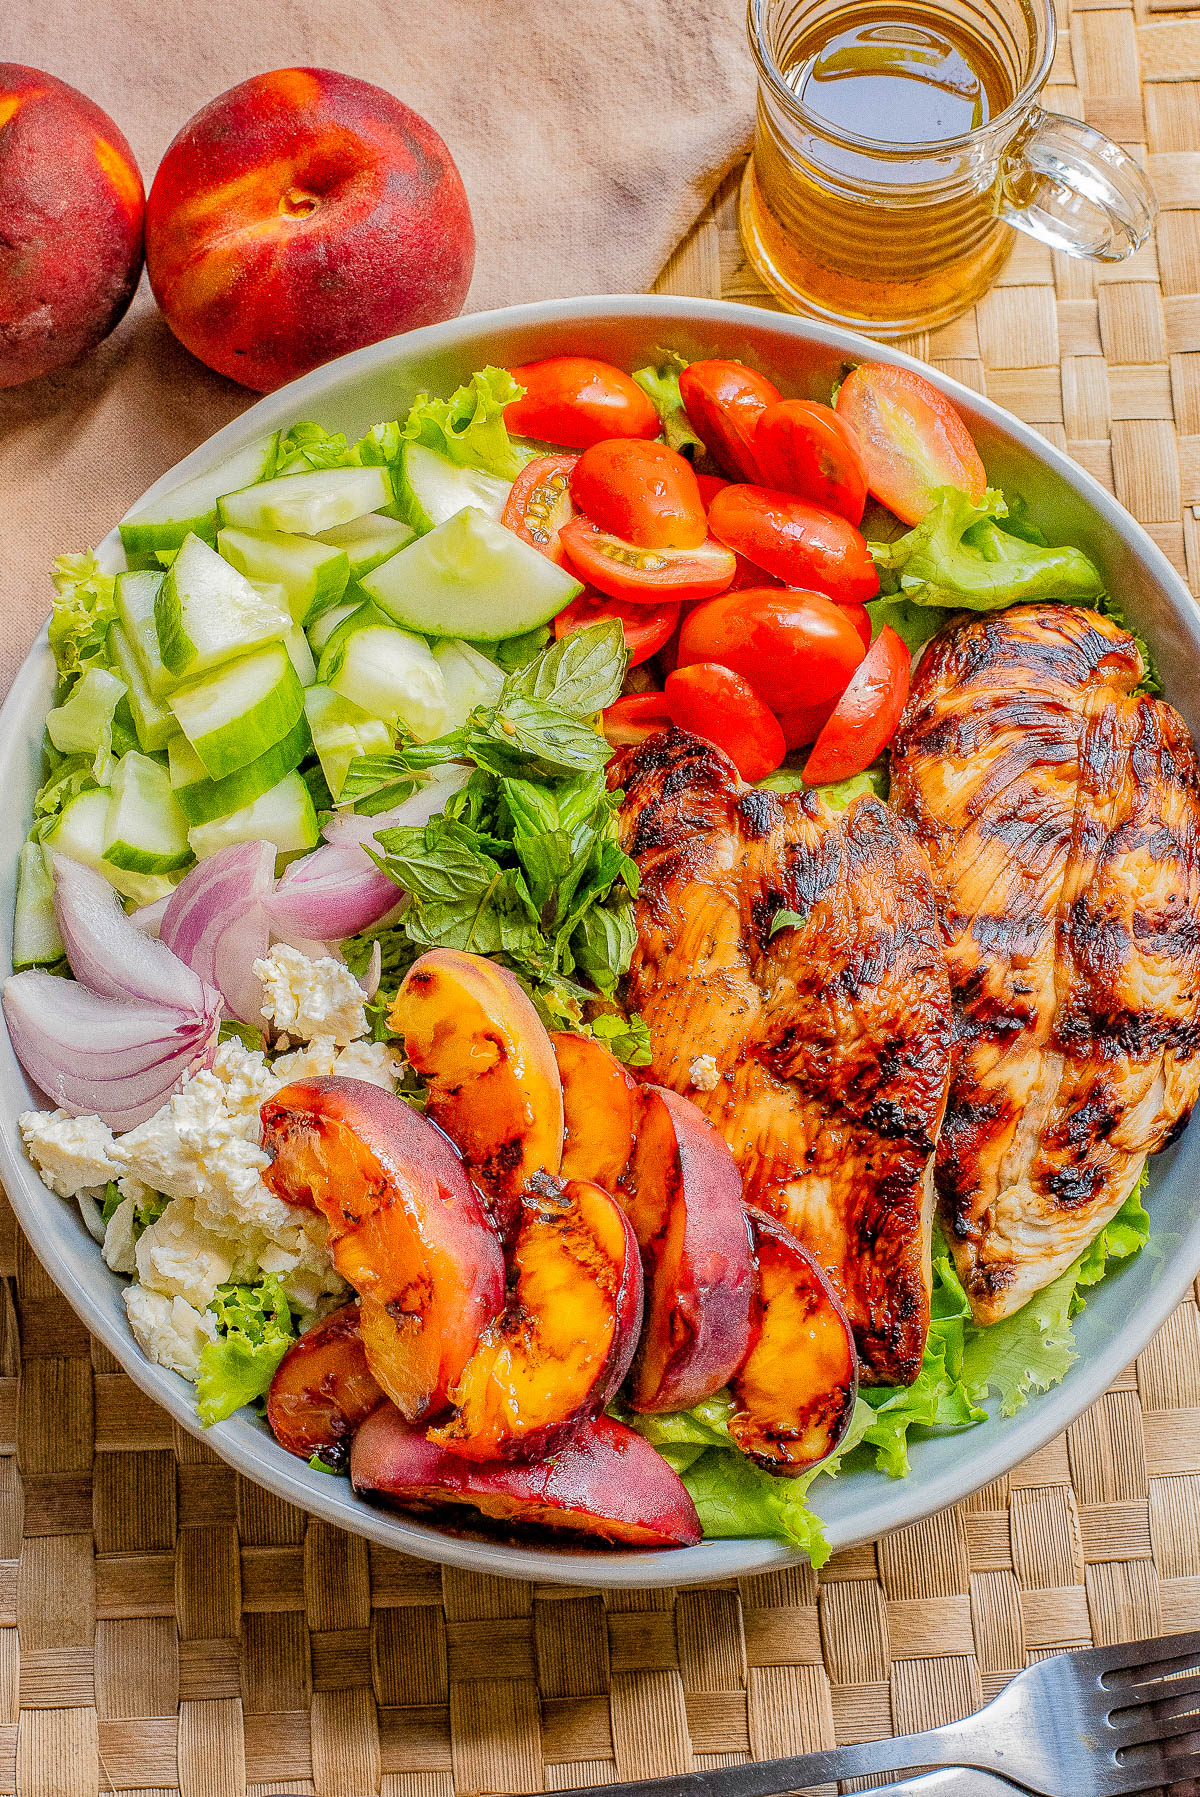 A bowl of salad with grilled chicken, grilled peaches, cherry tomatoes, cucumber, red onion, feta cheese, and herbs. Peaches and a mug of beverage are in the background.